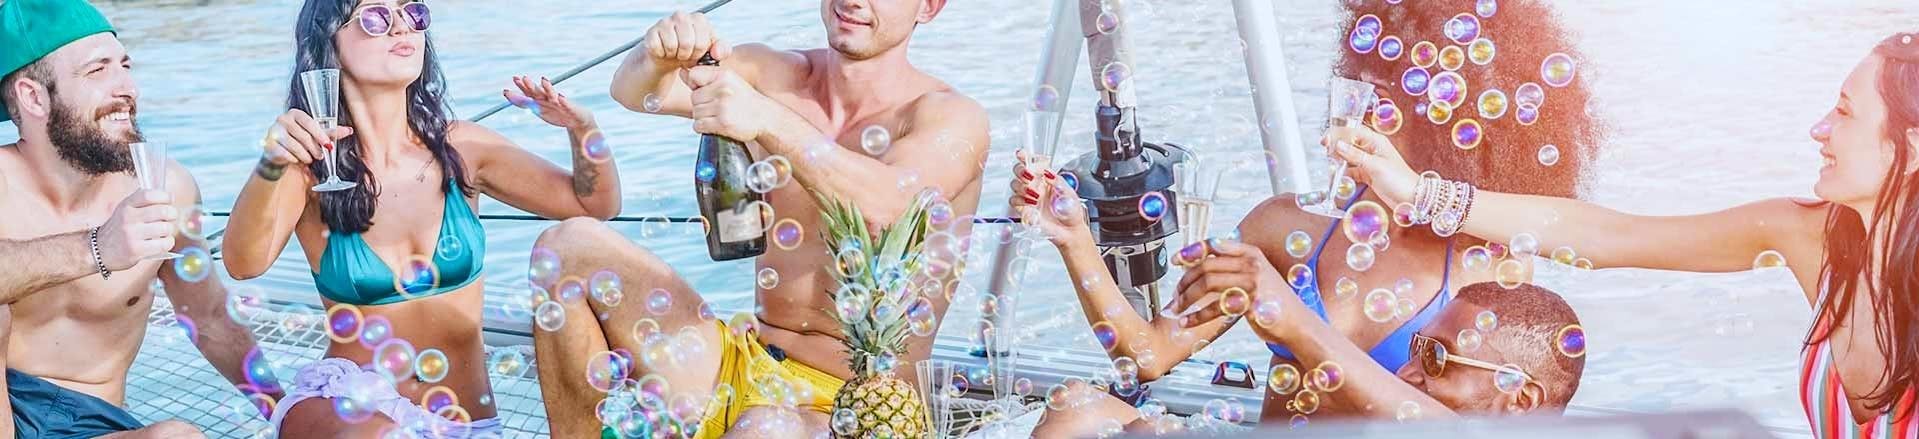 A group of participants having fun surrounded by bubbles and drinks on a party boat in Mykonos during an activity with Mykonos Boat Club.